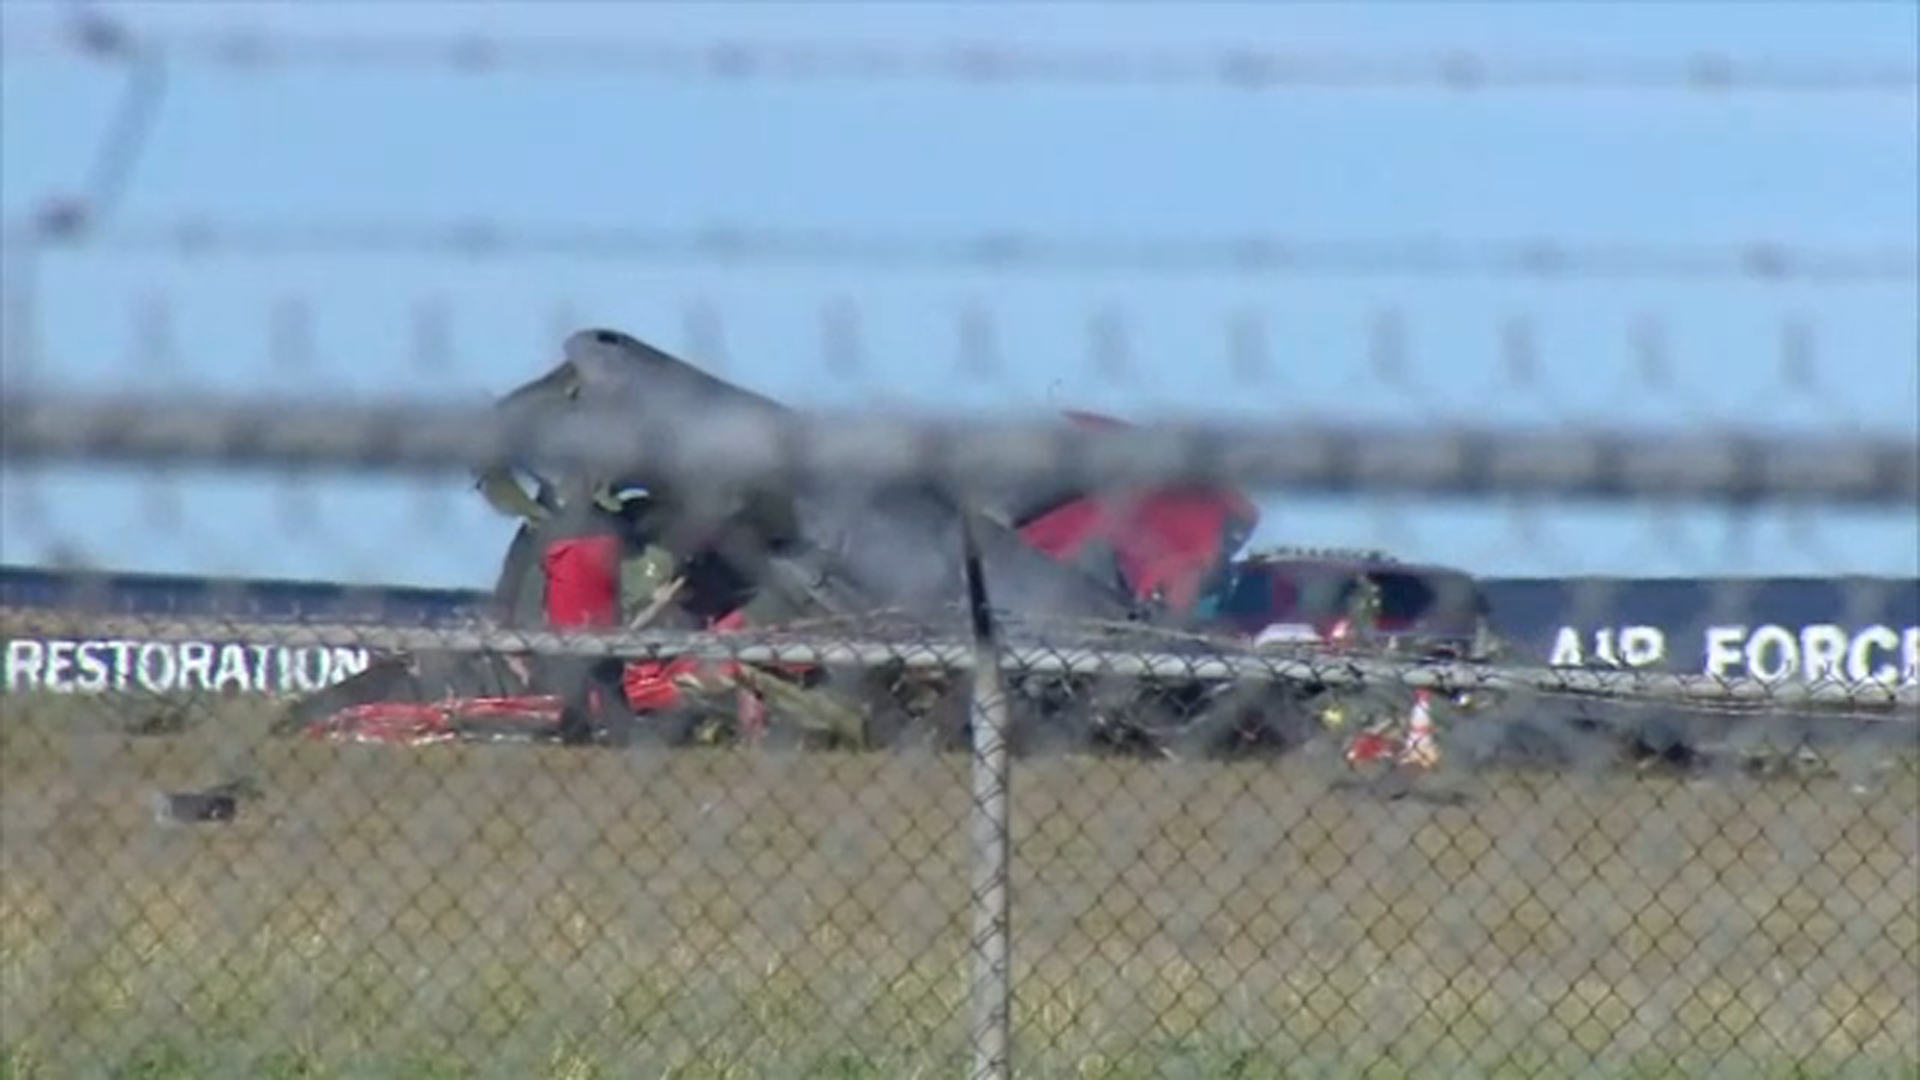 2 aircraft collide mid-air during WWII airshow in Dallas